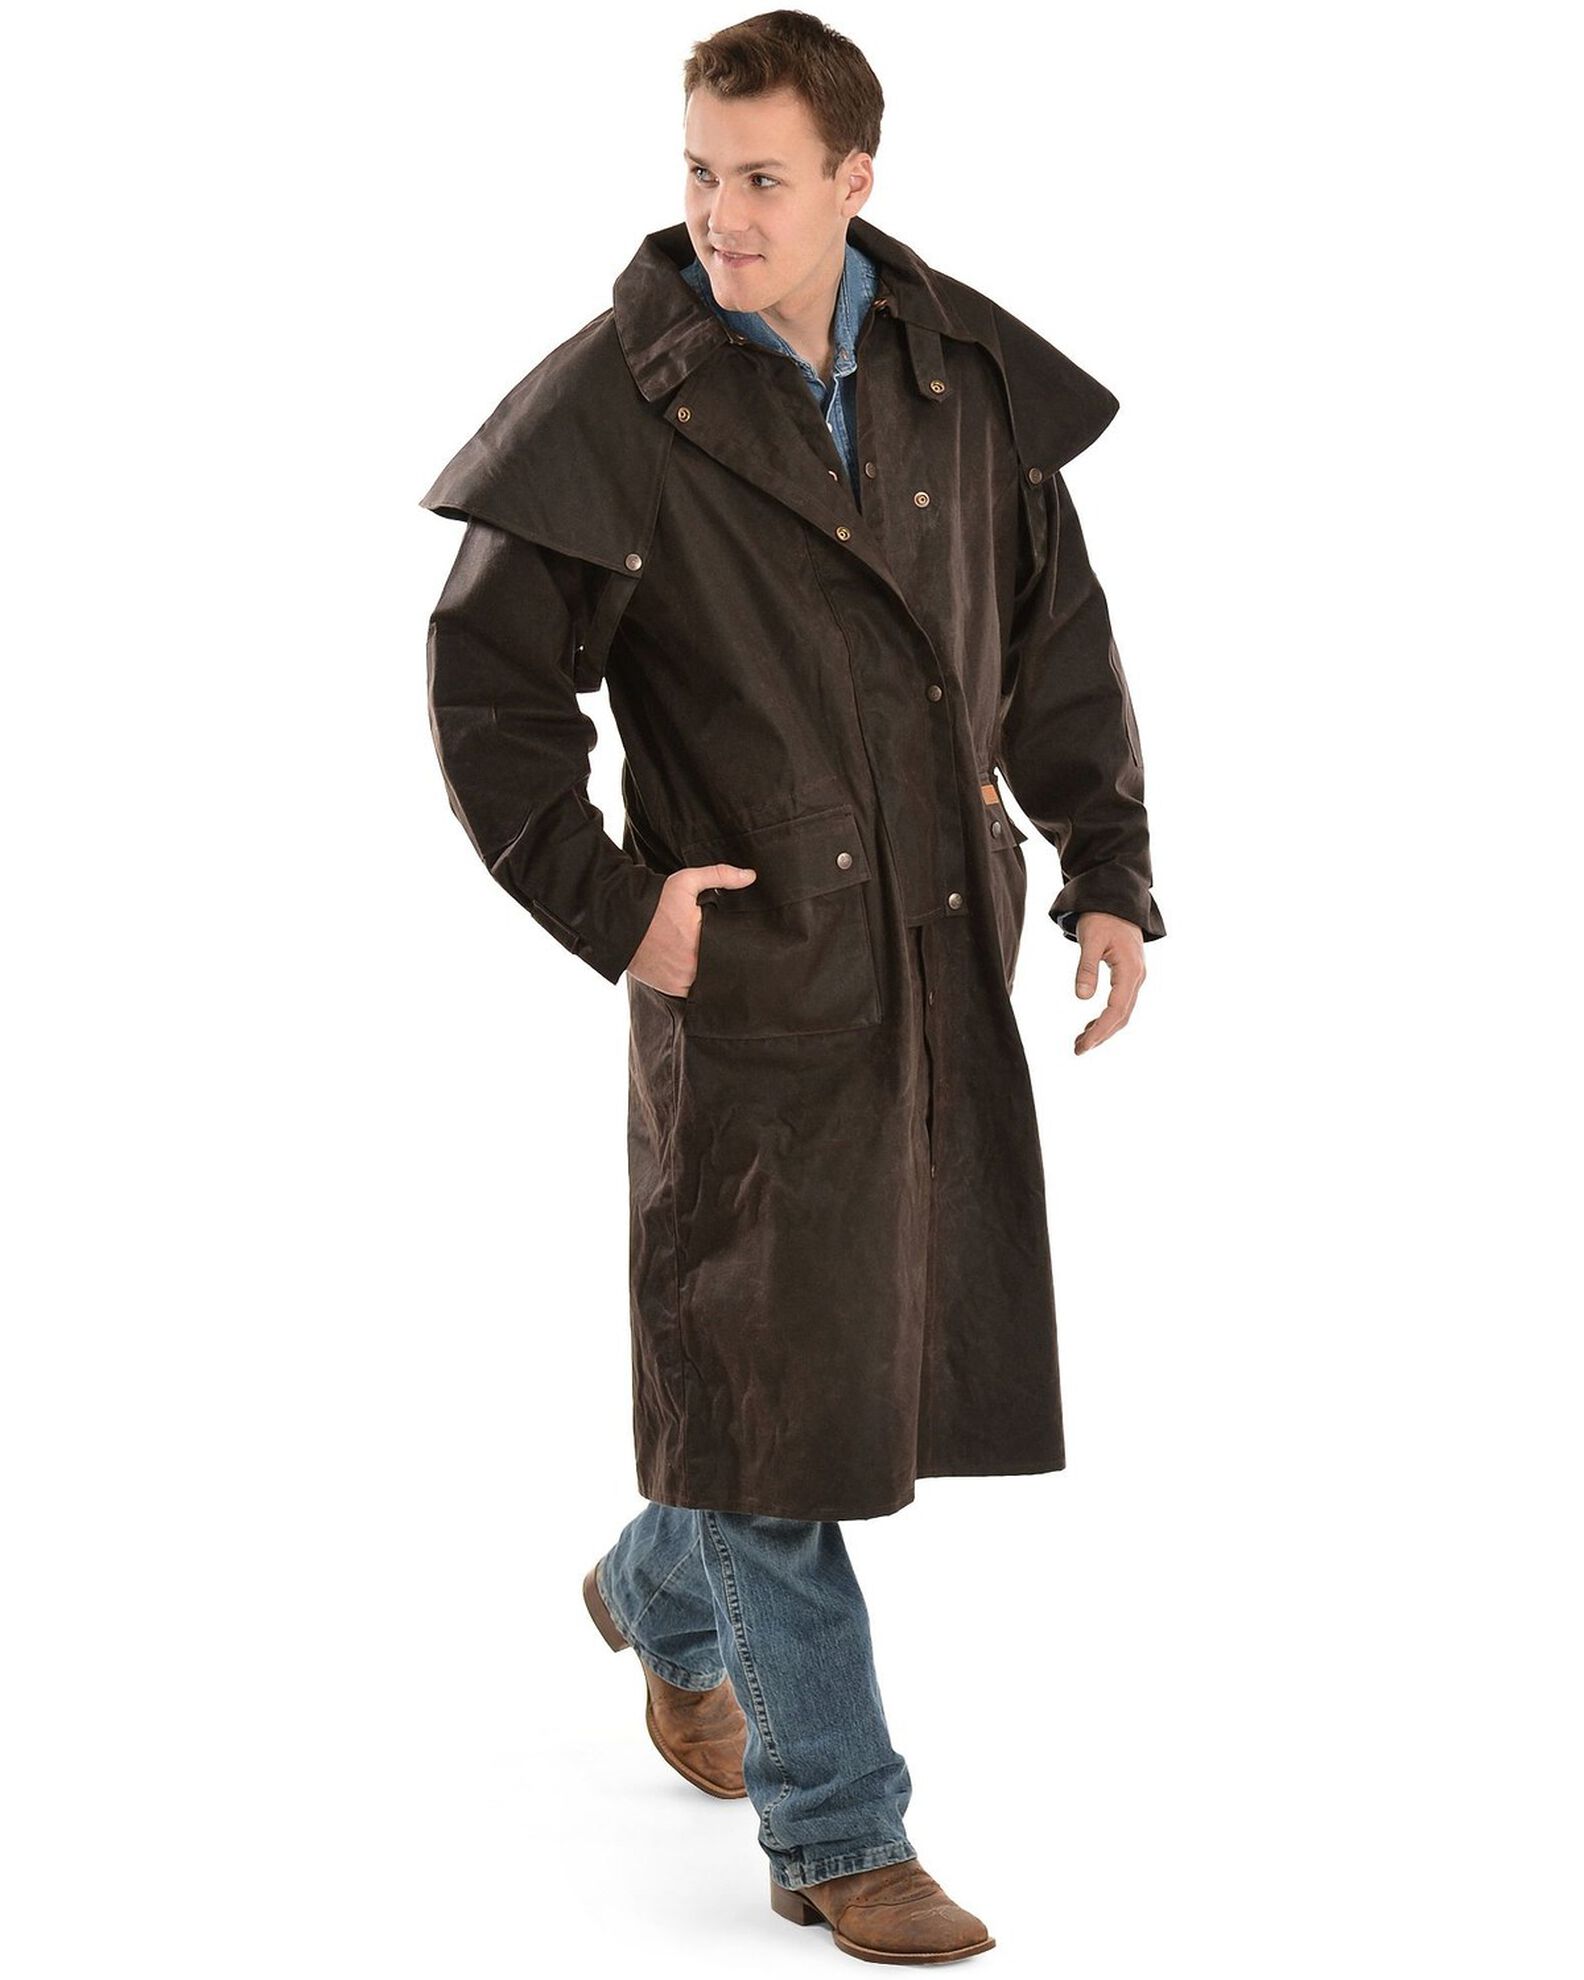 Product Name: Outback Men's Low Ride Duster Coat